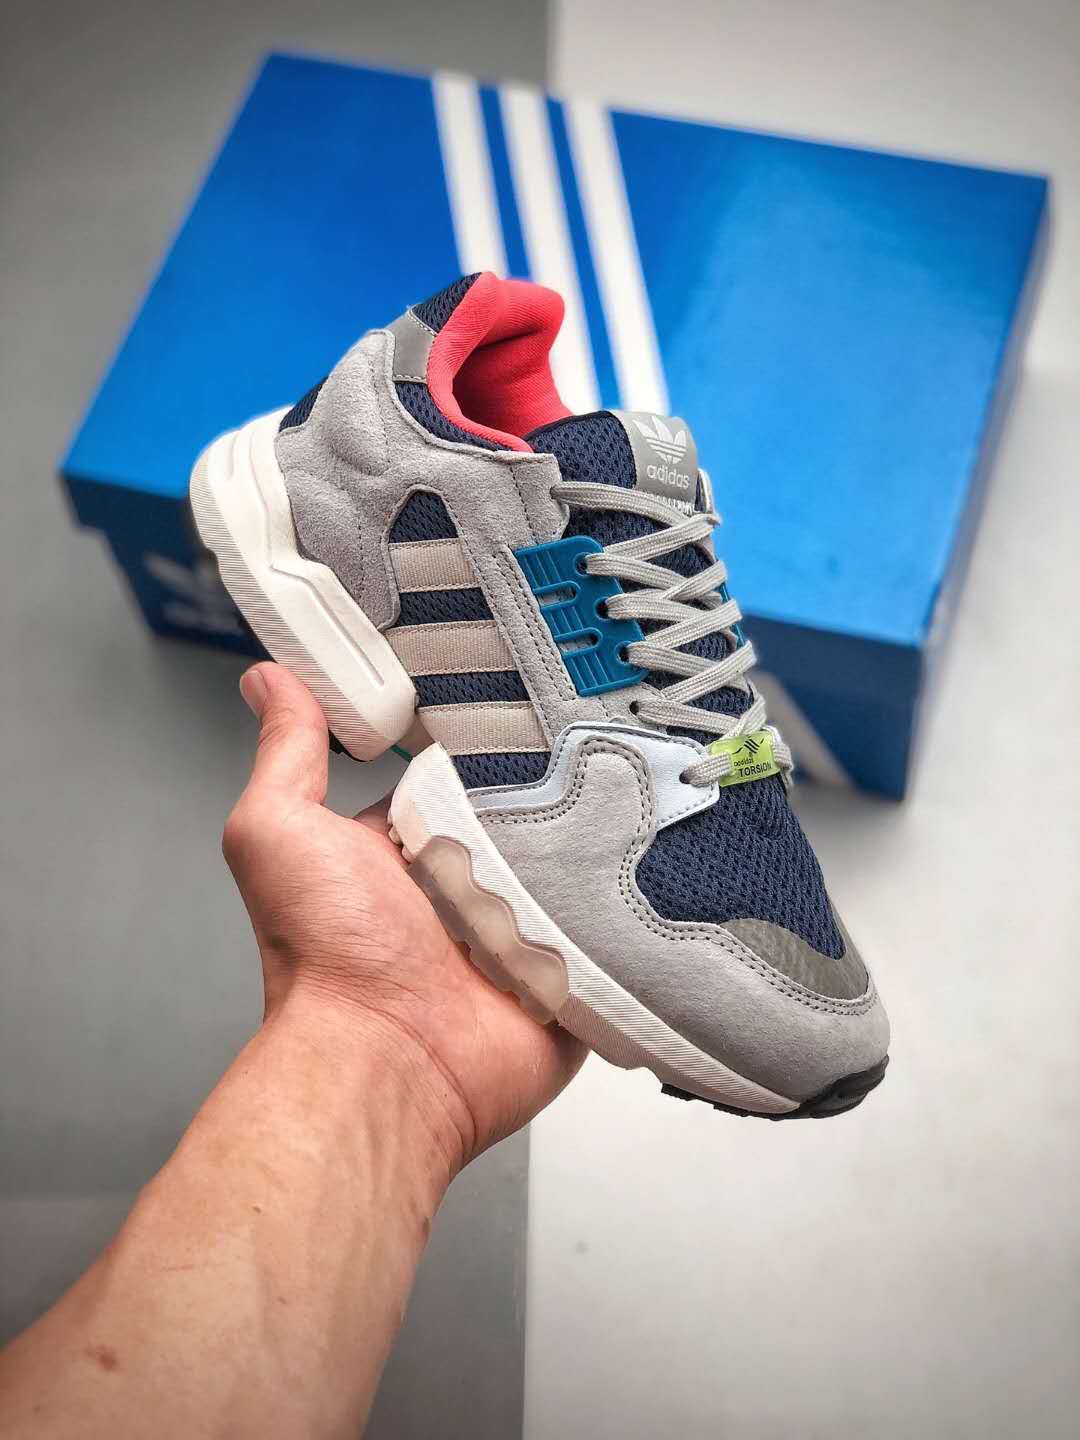 Adidas ZX Torsion Collegiate Navy Grey Two EE4845 - Stylish and Comfortable Sneakers